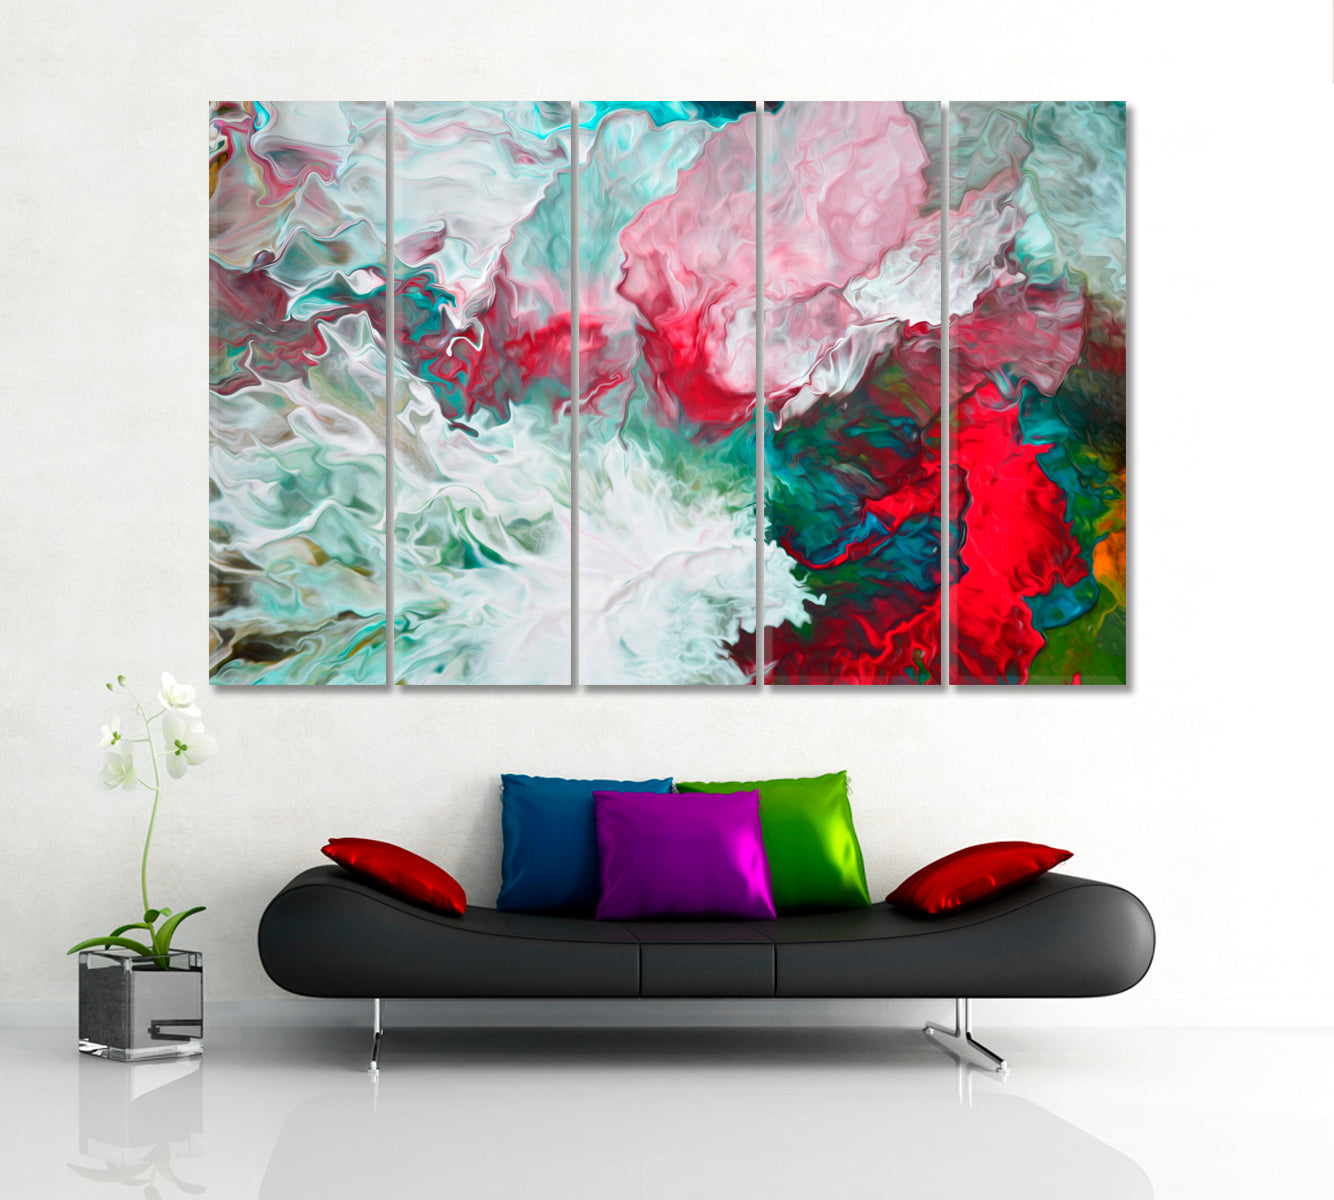 Multi-colored Abstract Mixture of Colors Artwork Fluid Art, Oriental Marbling Canvas Print Artesty 5 panels 36" x 24" 